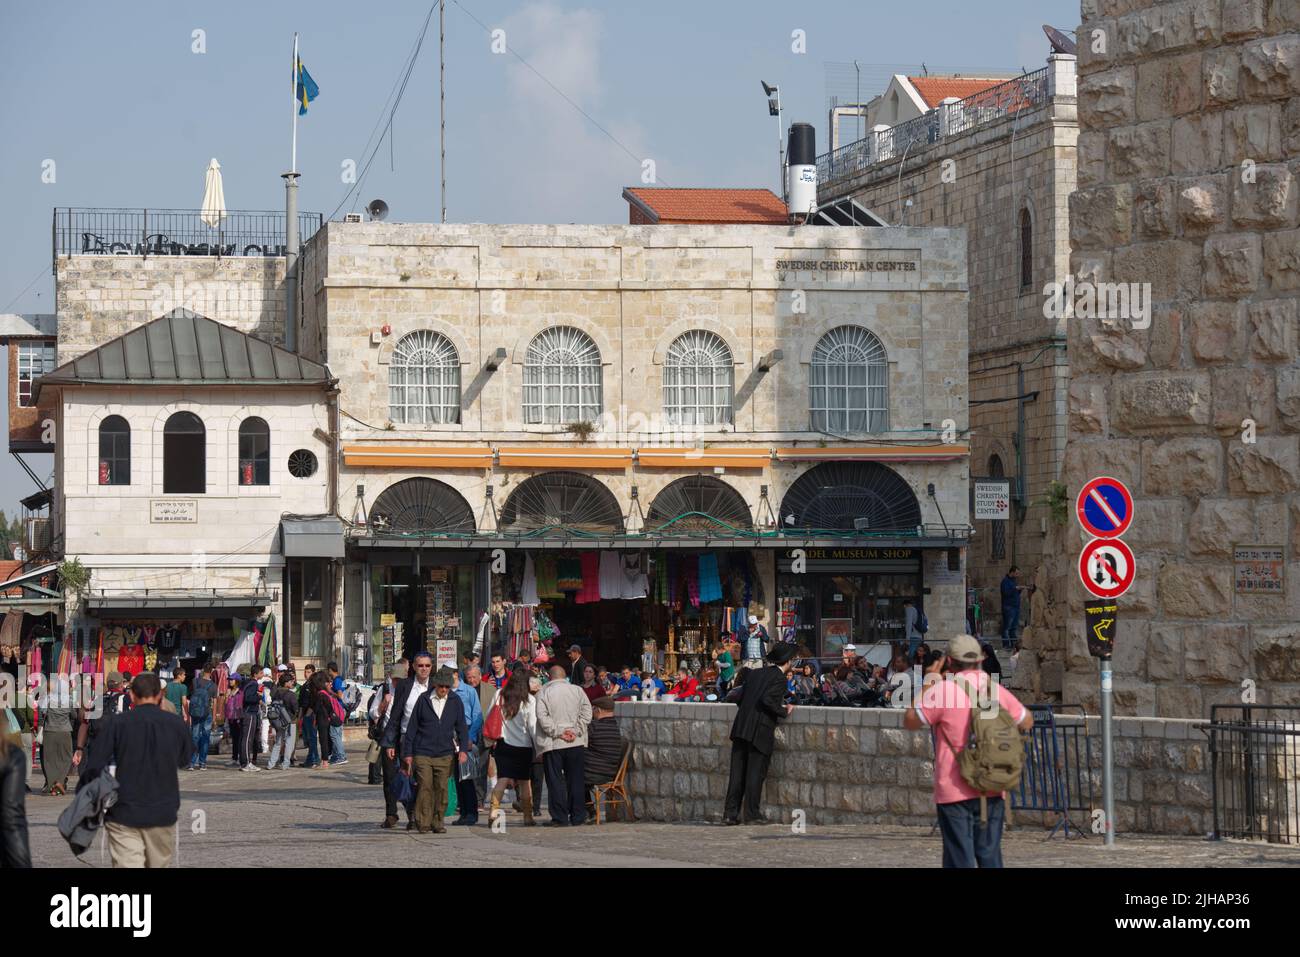 People on Omar Ibn Al-Khattab square in the Old City of Jerusalem, Israel, at the building of Swedish Christian Study Centre Stock Photo